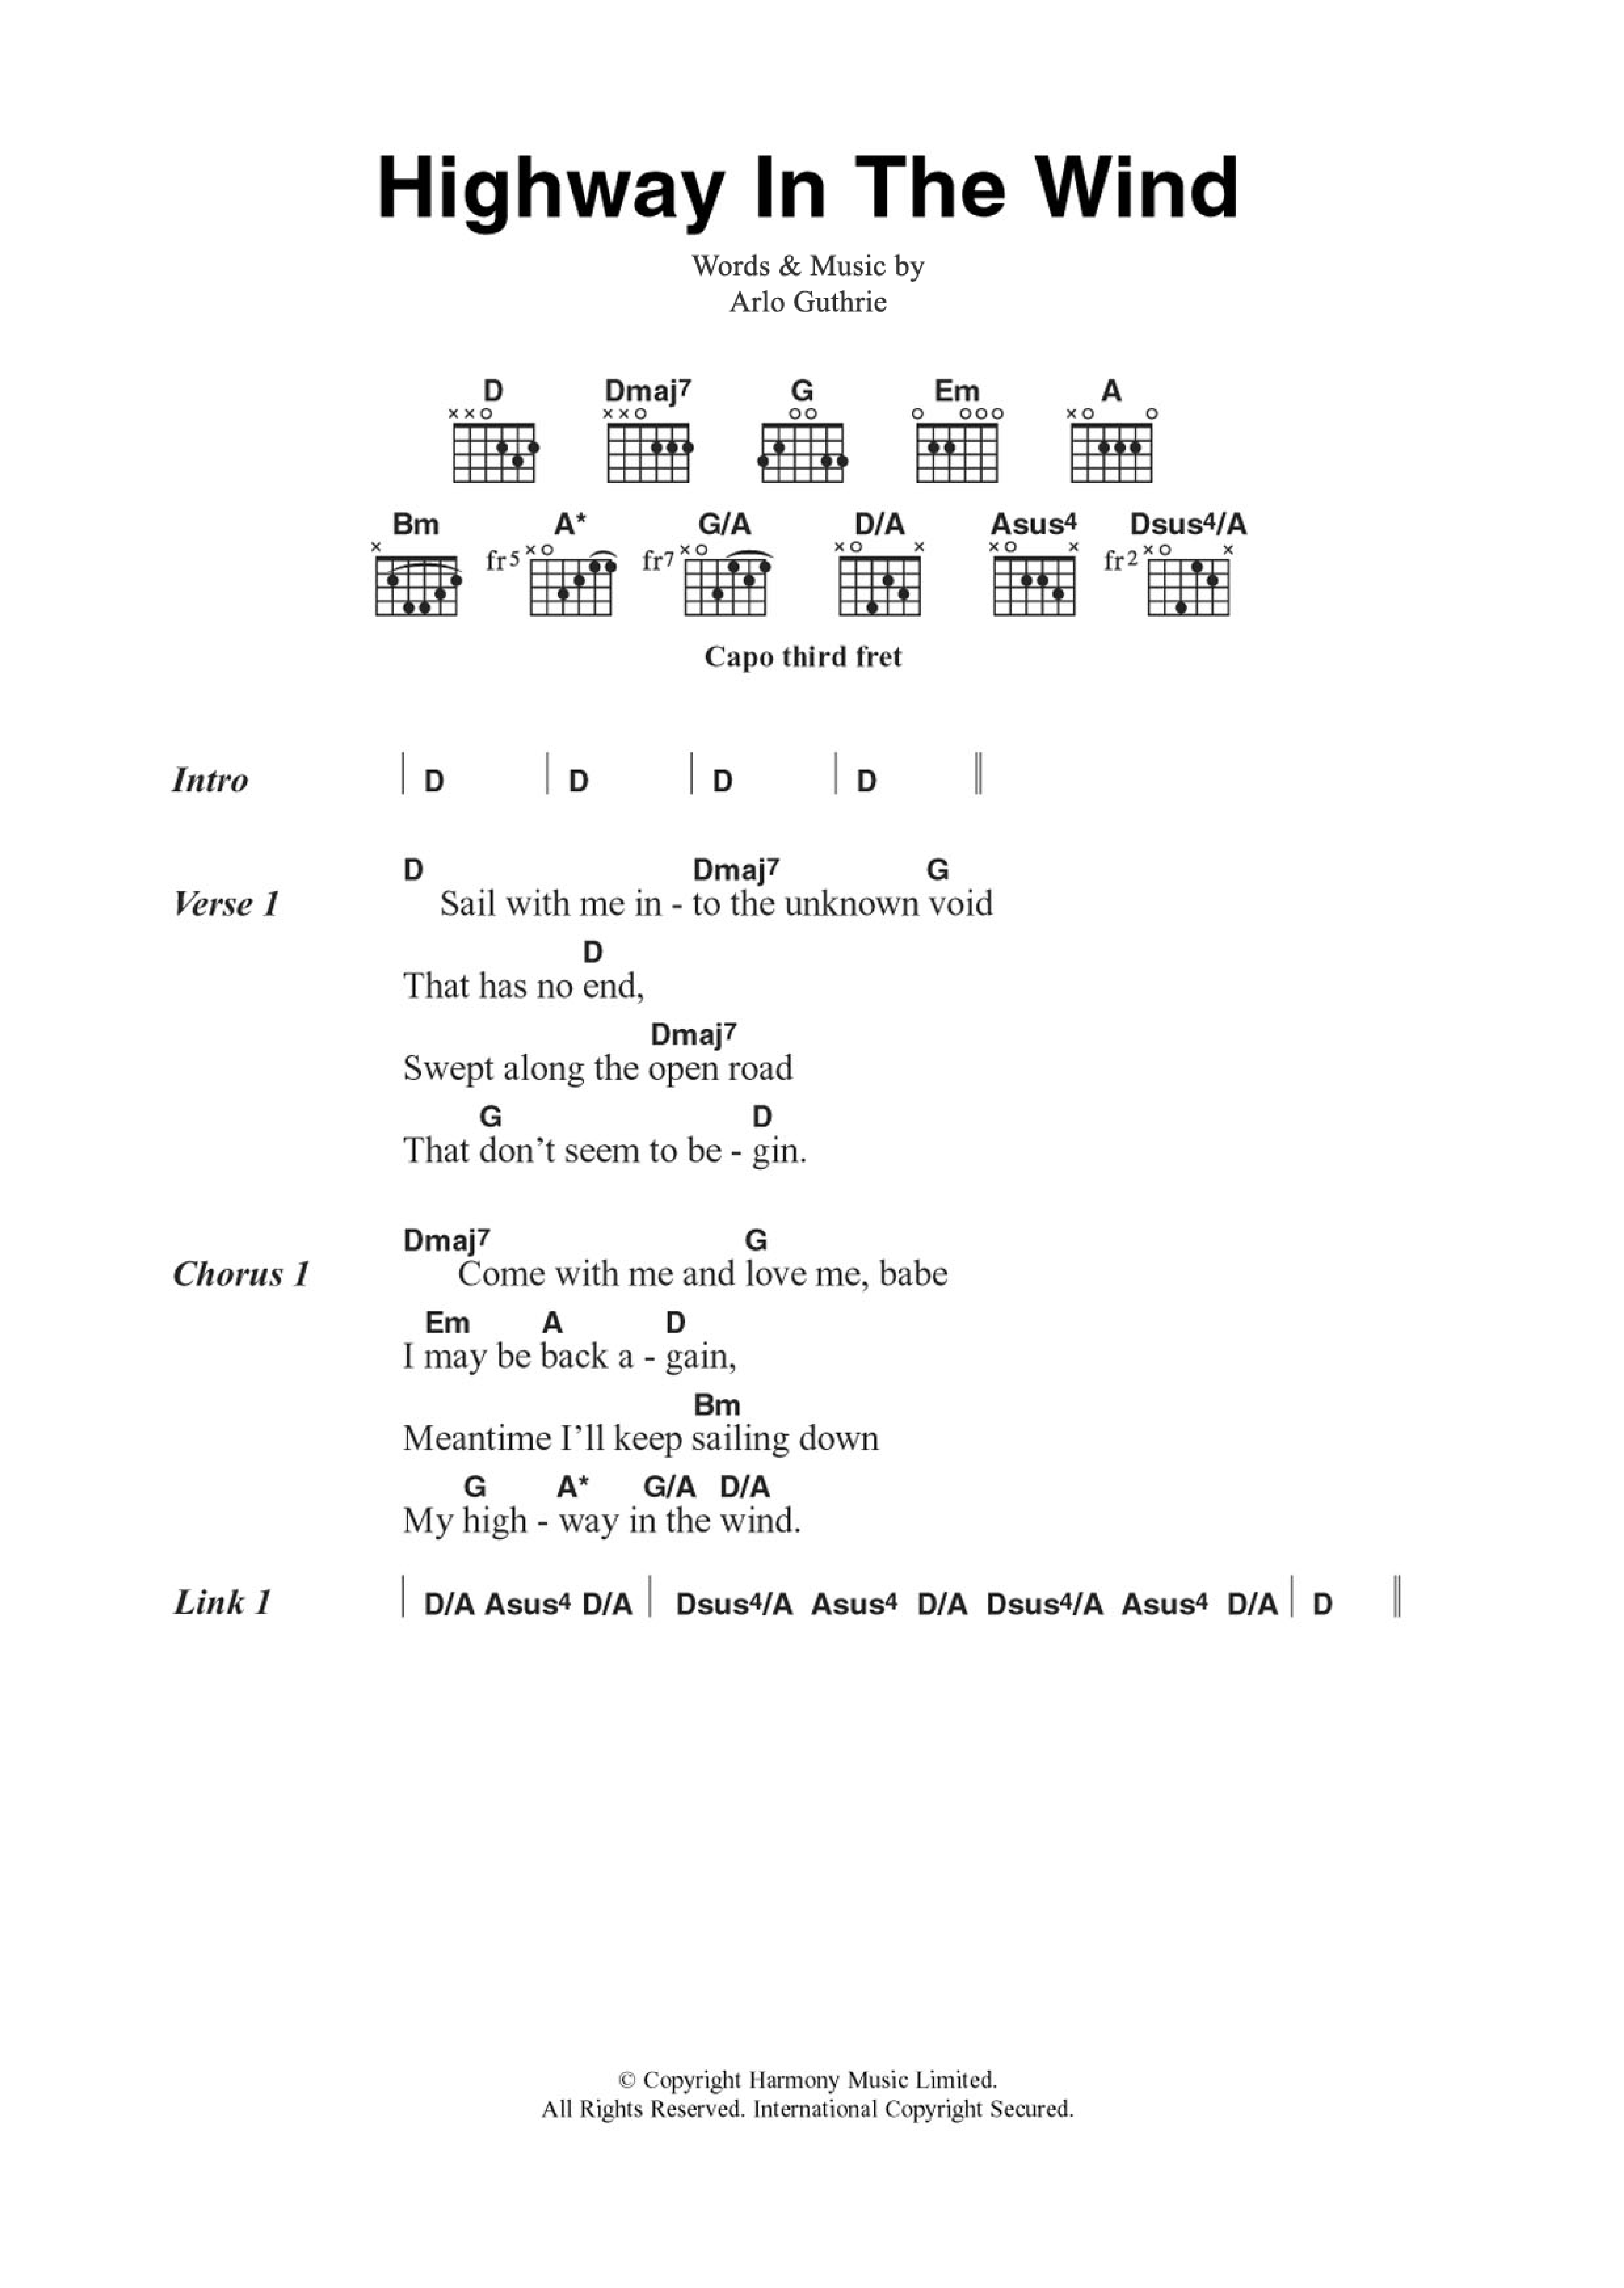 Download Arlo Guthrie Highway In The Wind Sheet Music